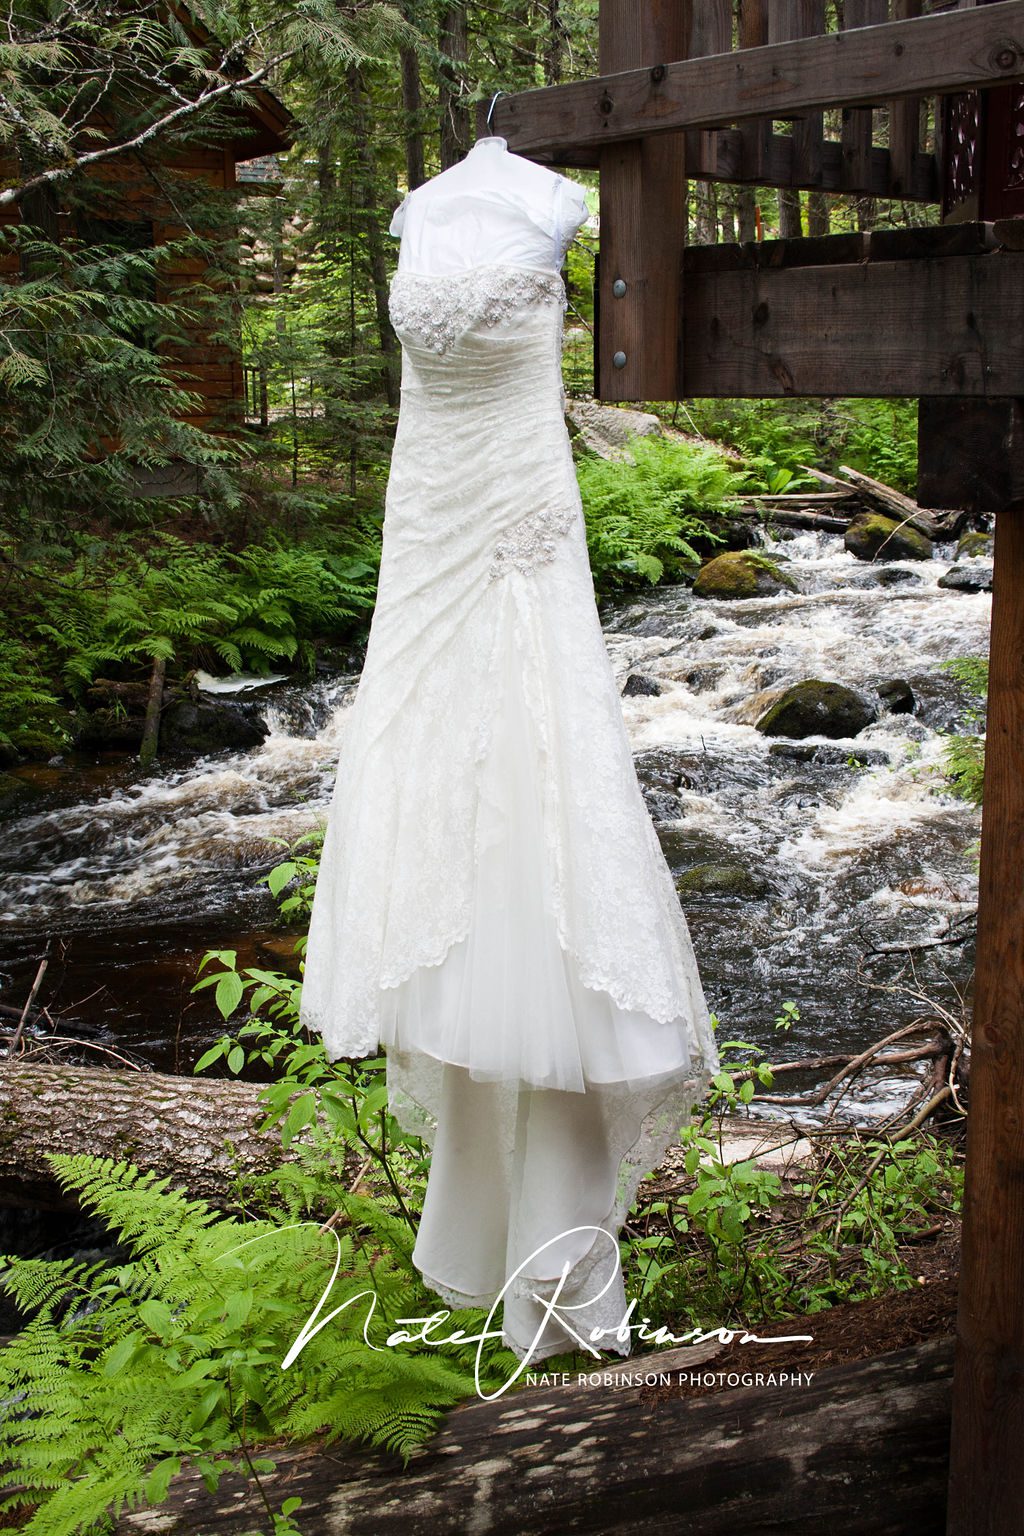 Bride's dress hanging in the trees with waterfall behind it at Elkins Resort Wedding